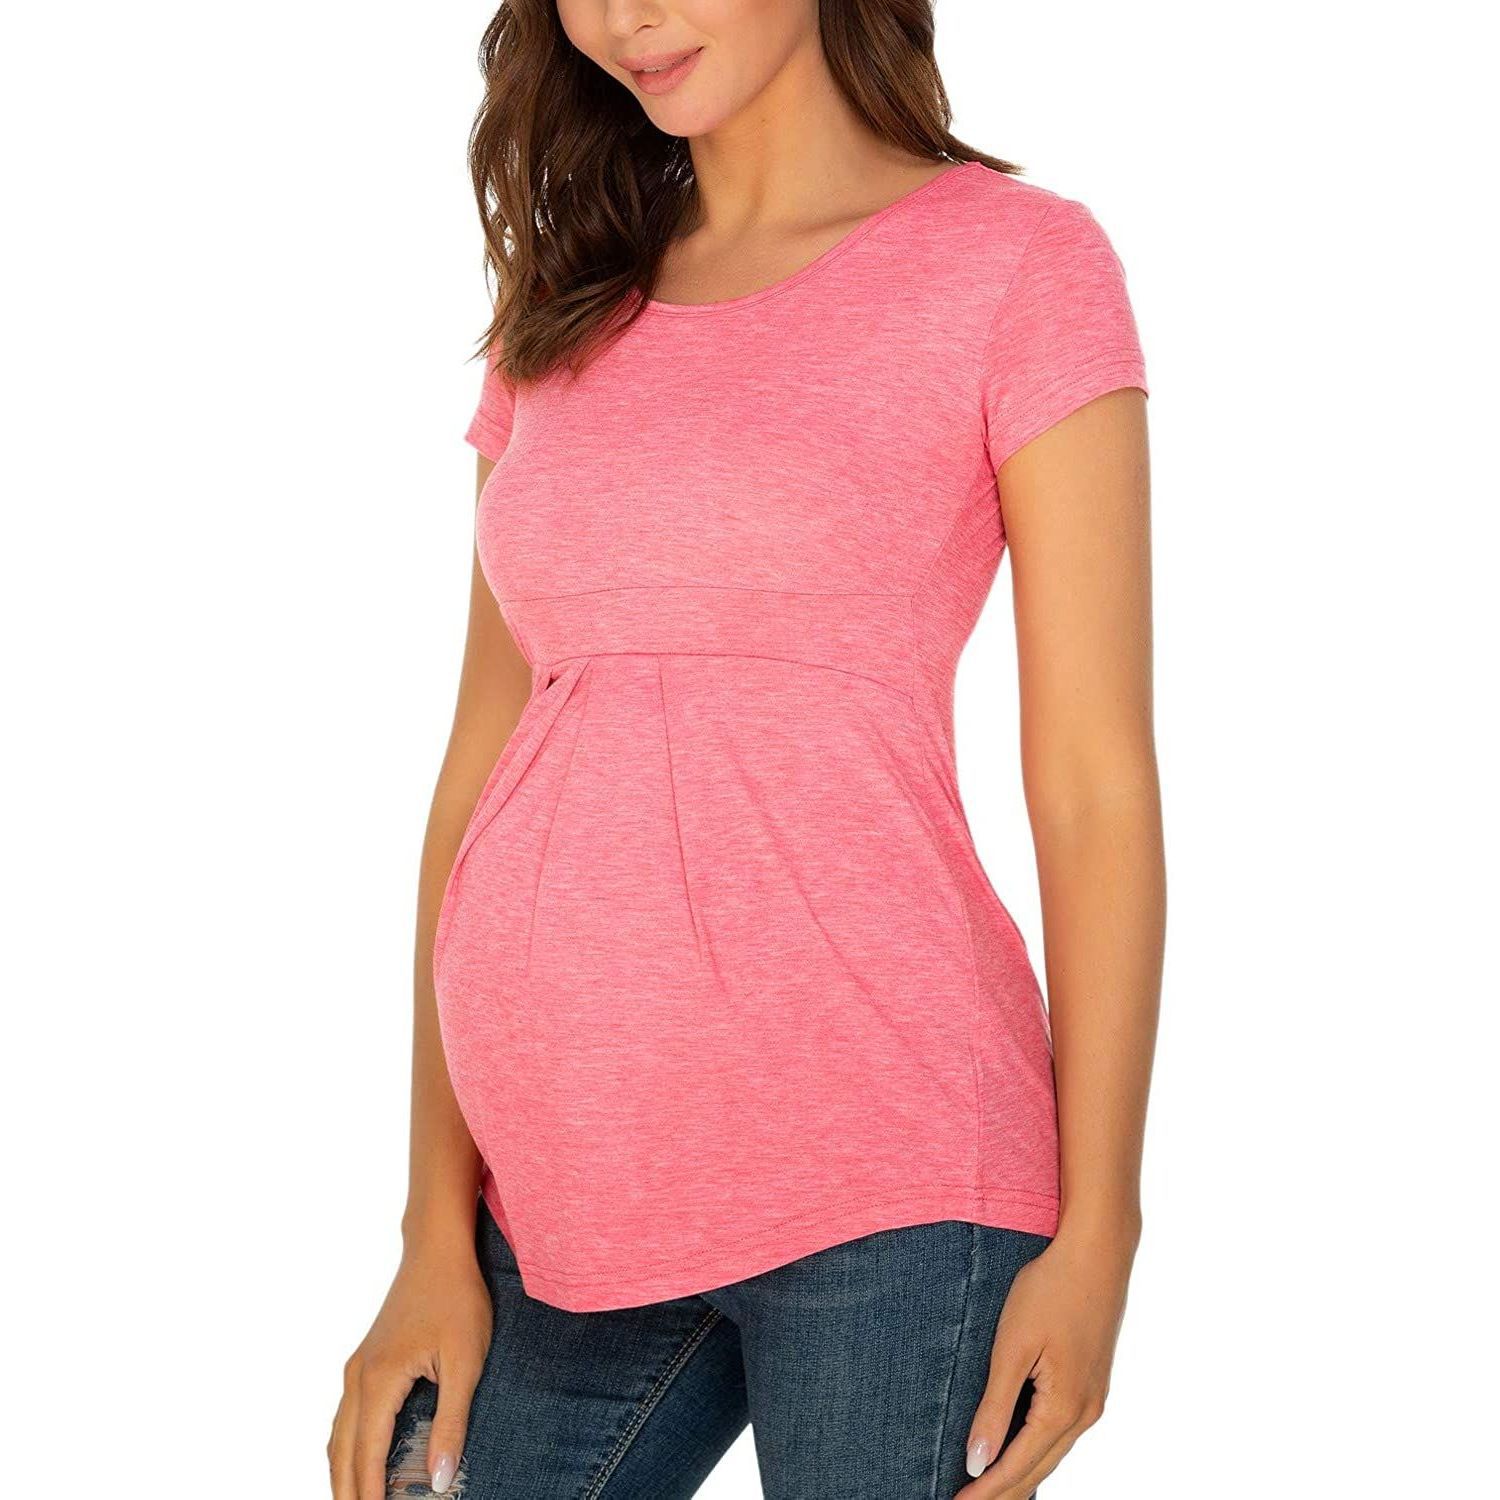 Totes Preggers Maternity T-Shirt - maternity cut shirt with ruched sid –  Twinkle Twinkle Tees